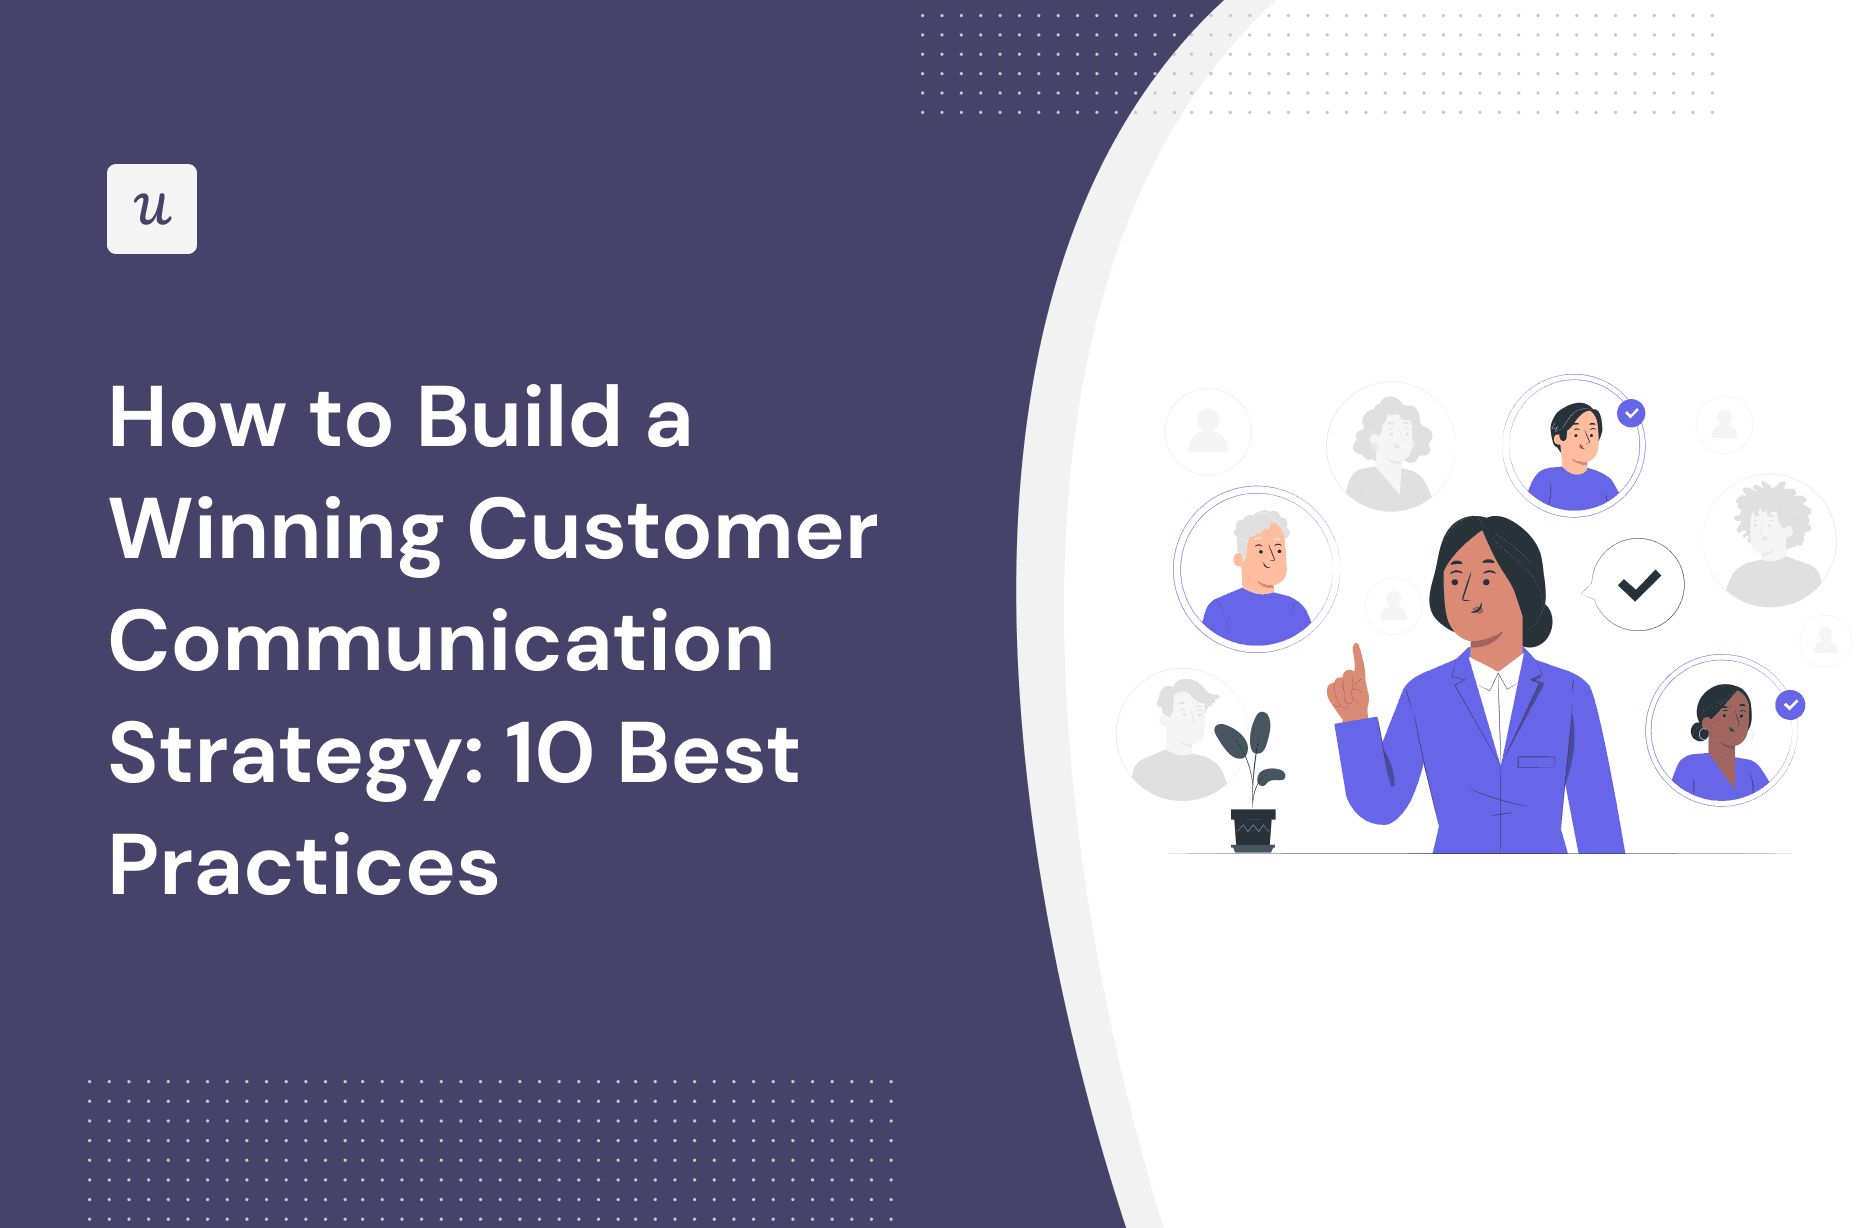 How to Build a Winning Customer Communication Strategy: 10 Best Practices cover